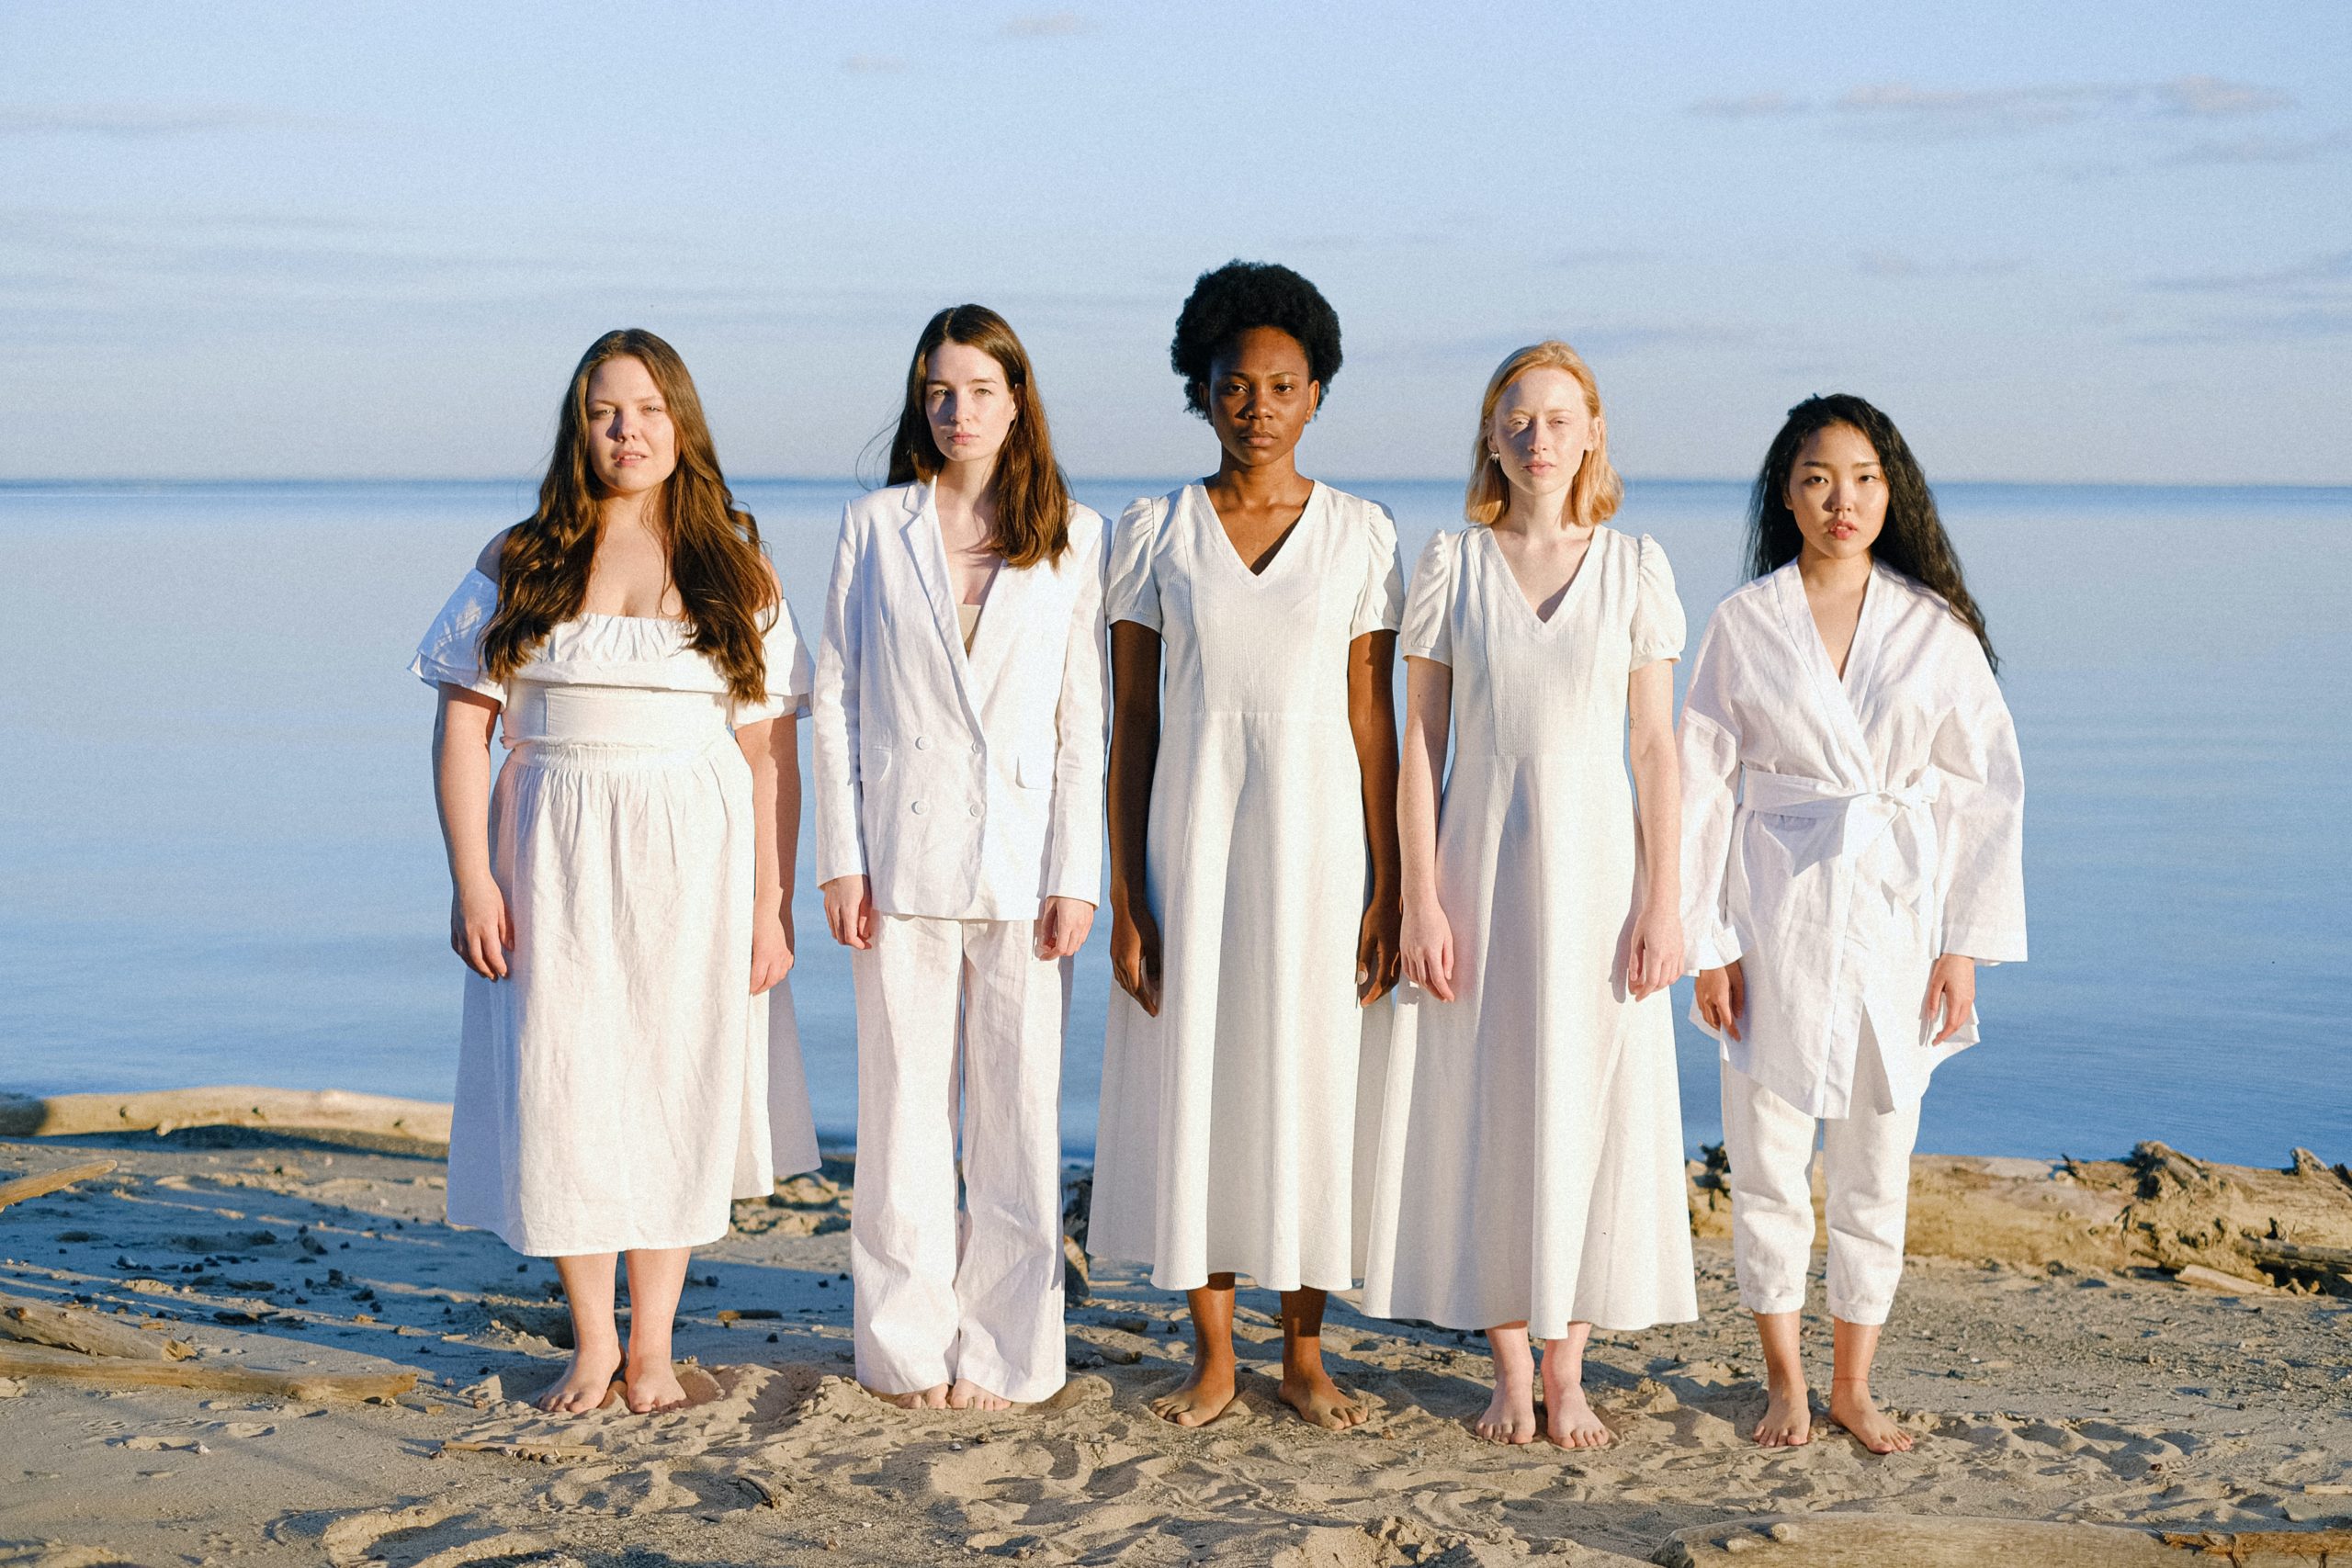 A diverse group of women stand on a beach.